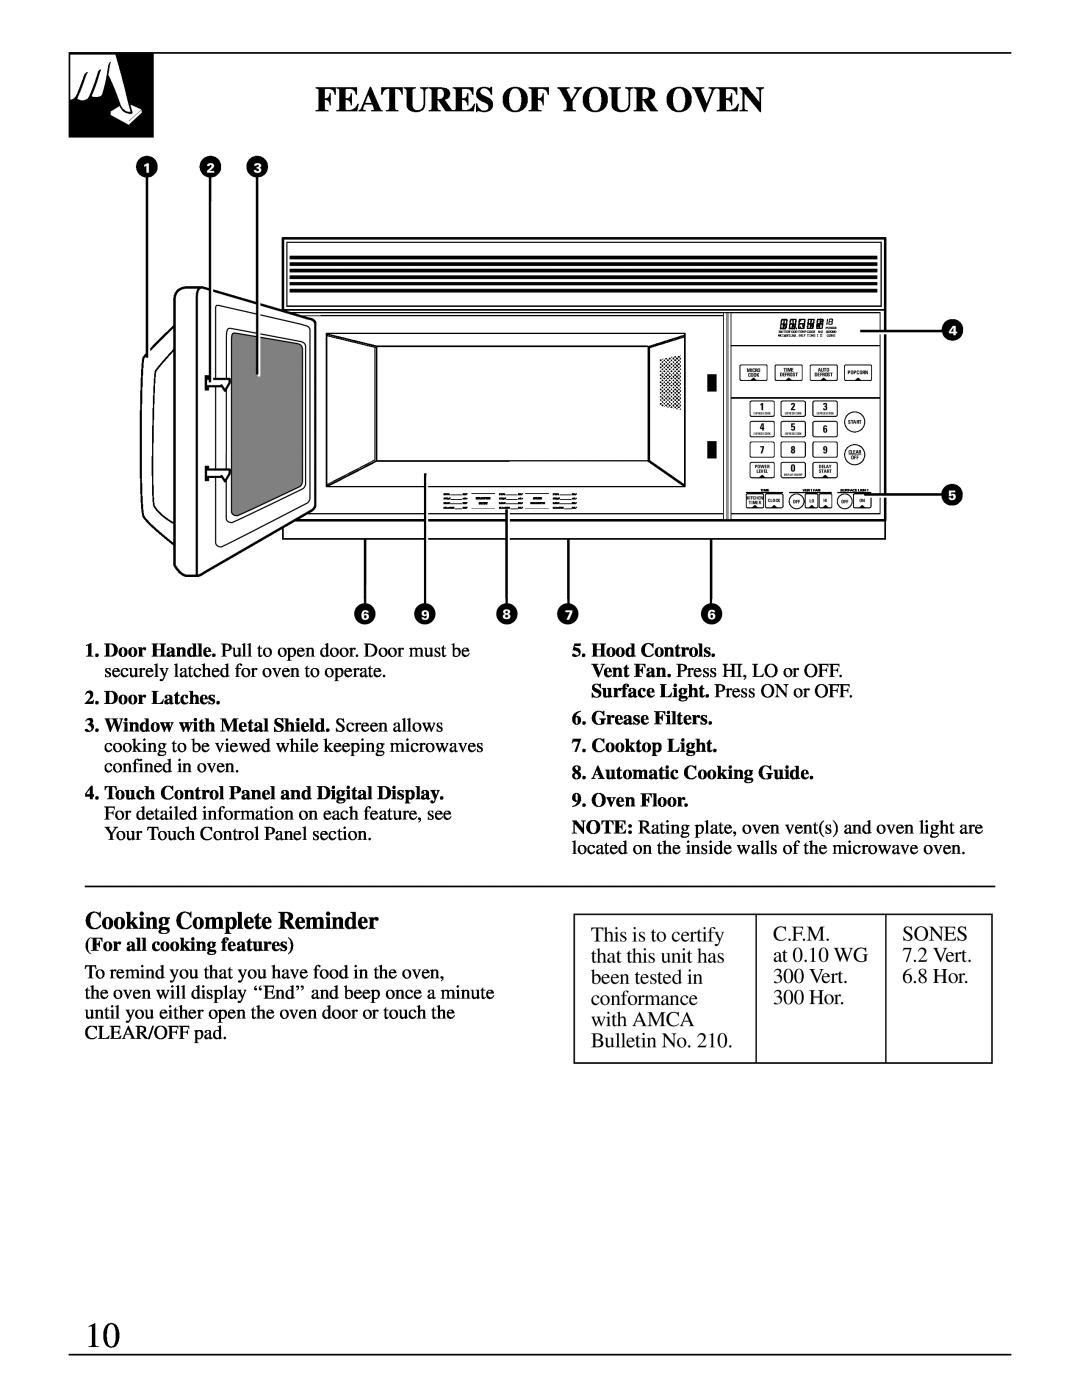 GE JVM231, JVM230 operating instructions Features Of Your Oven, Cooking Complete Reminder 